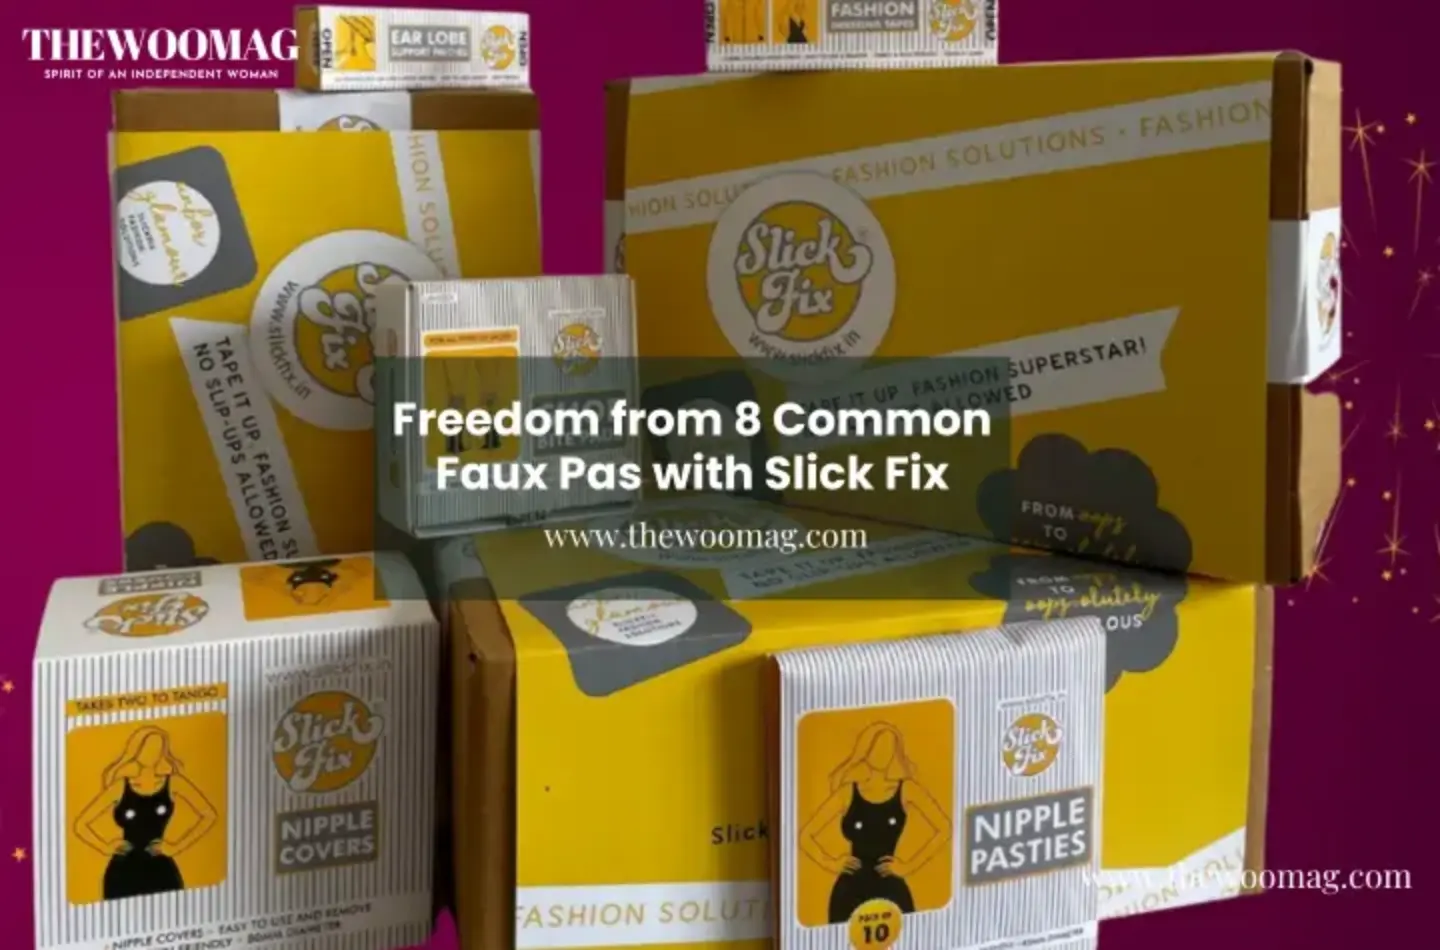 SLICK FIX: Freedom from 8 Common Faux Pas